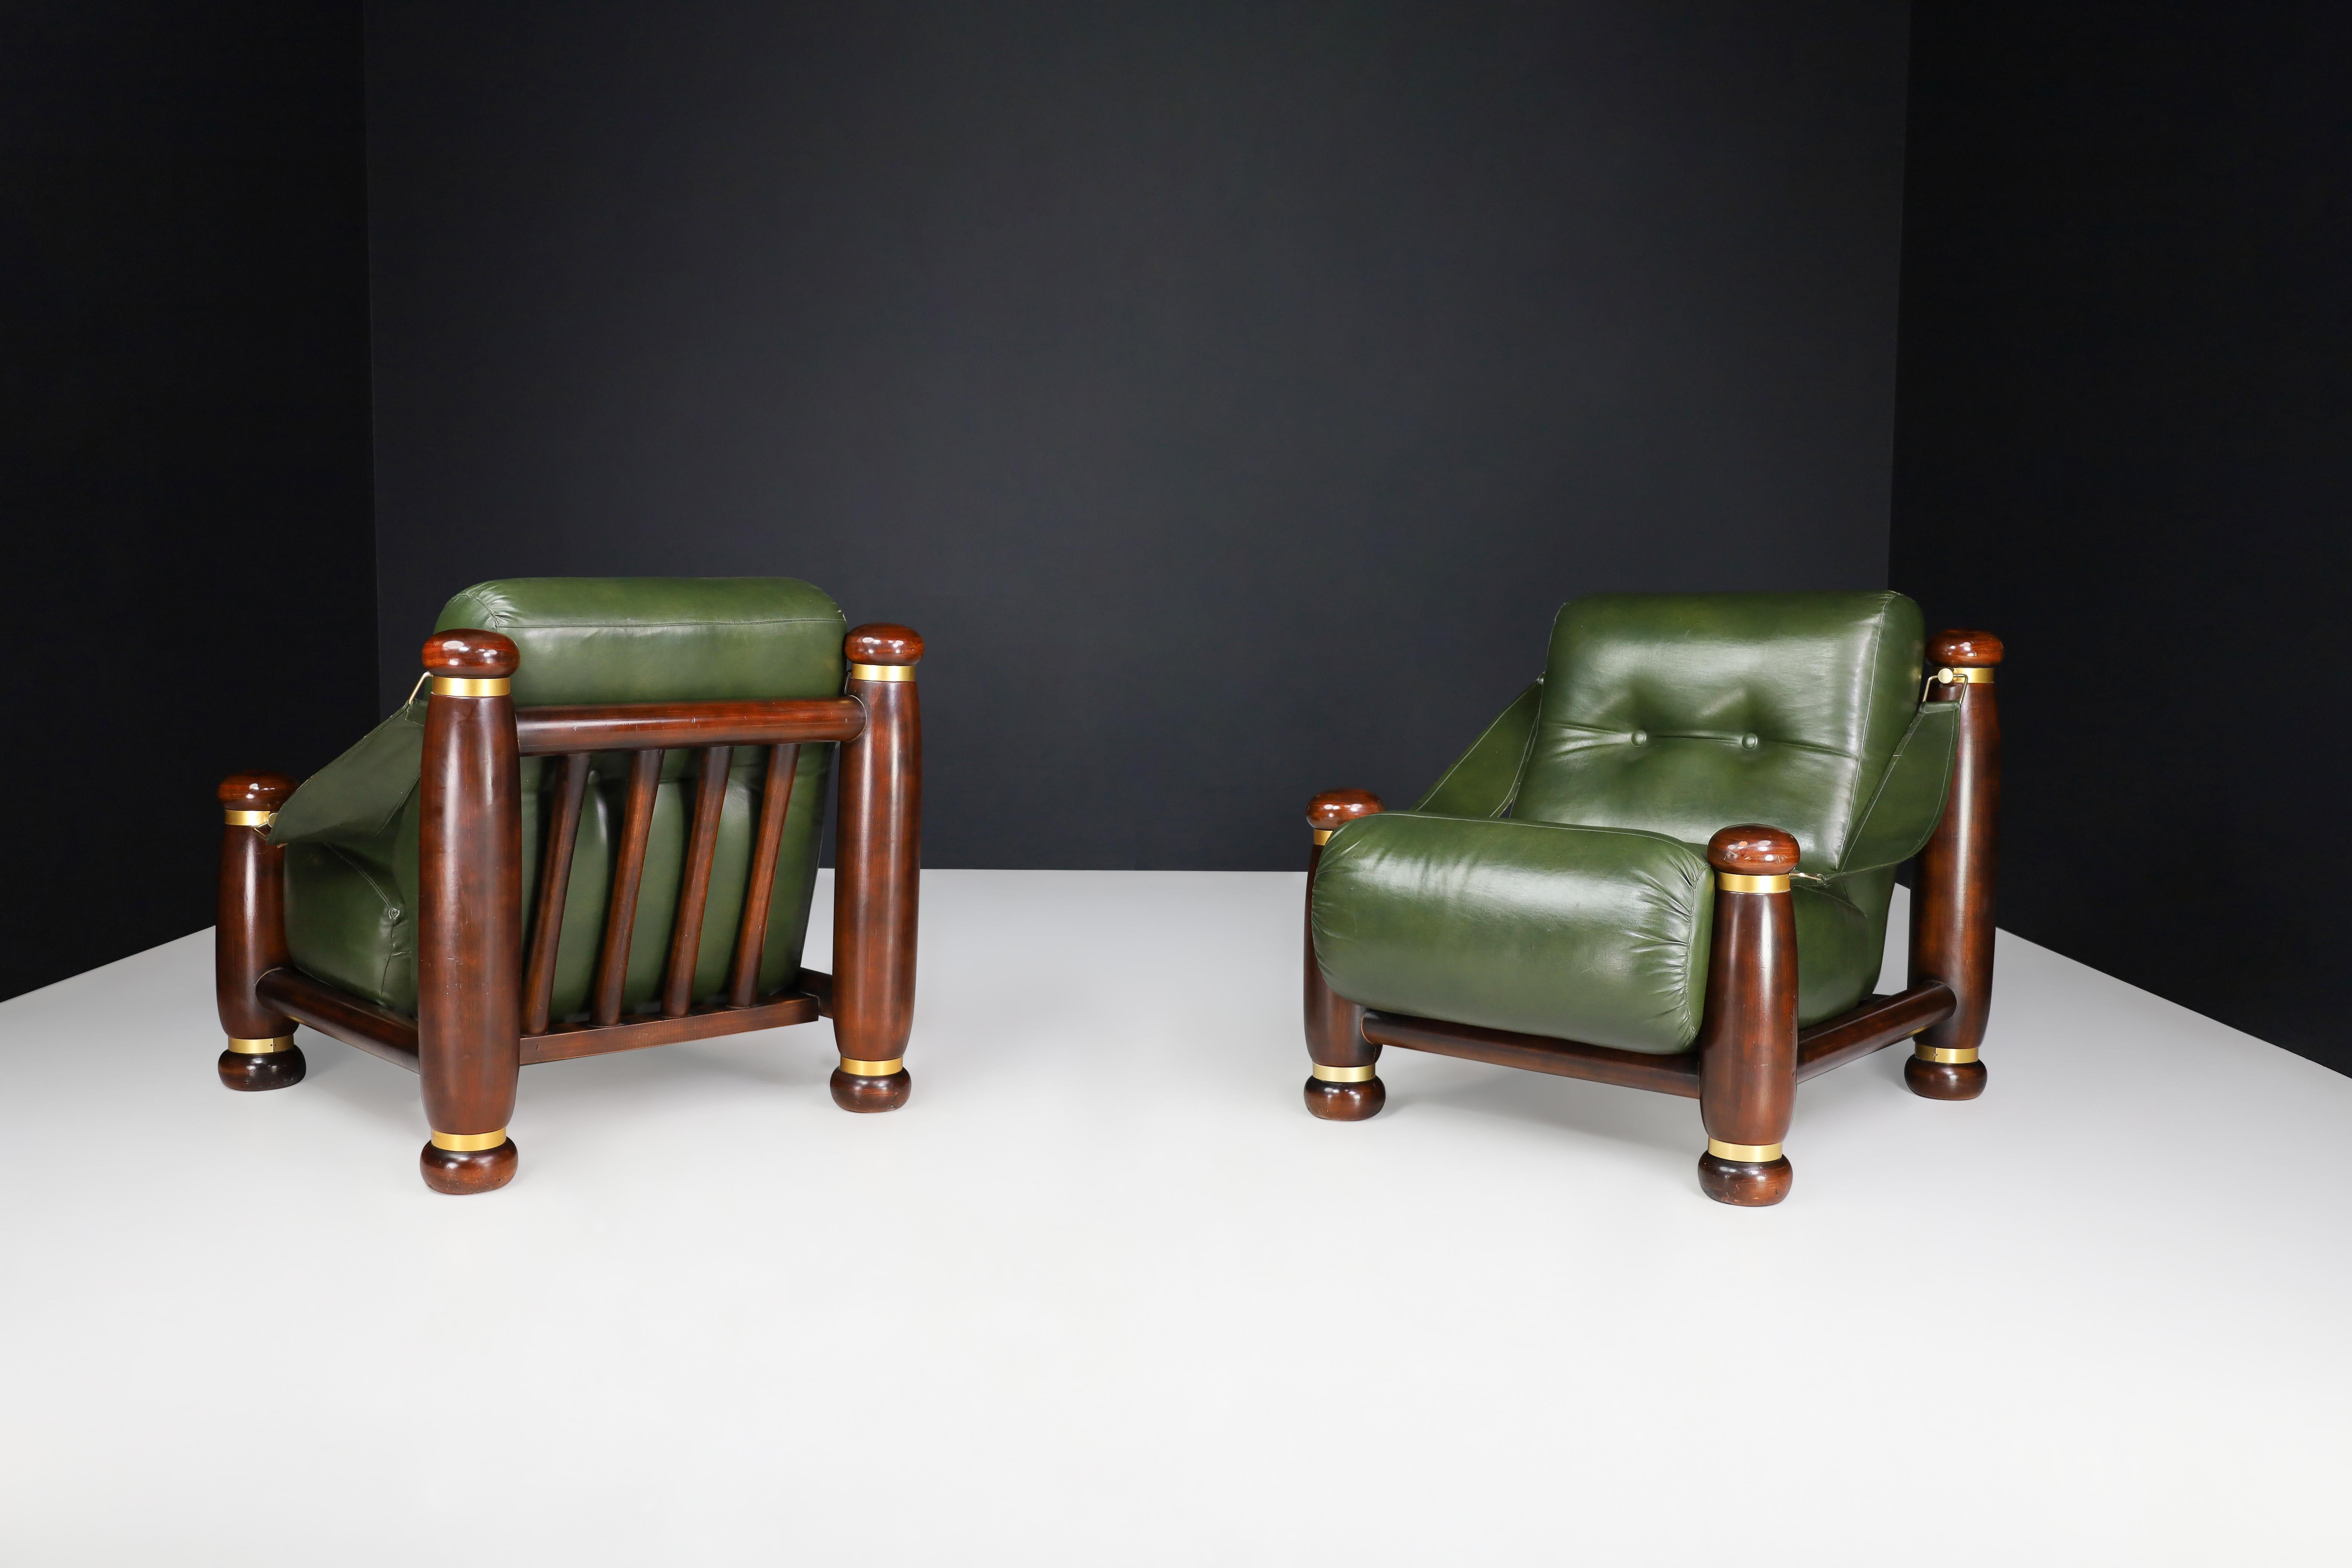 Walnut, Brass, and Green Leather Lounge Chairs from, Italy, 1960s For Sale 2